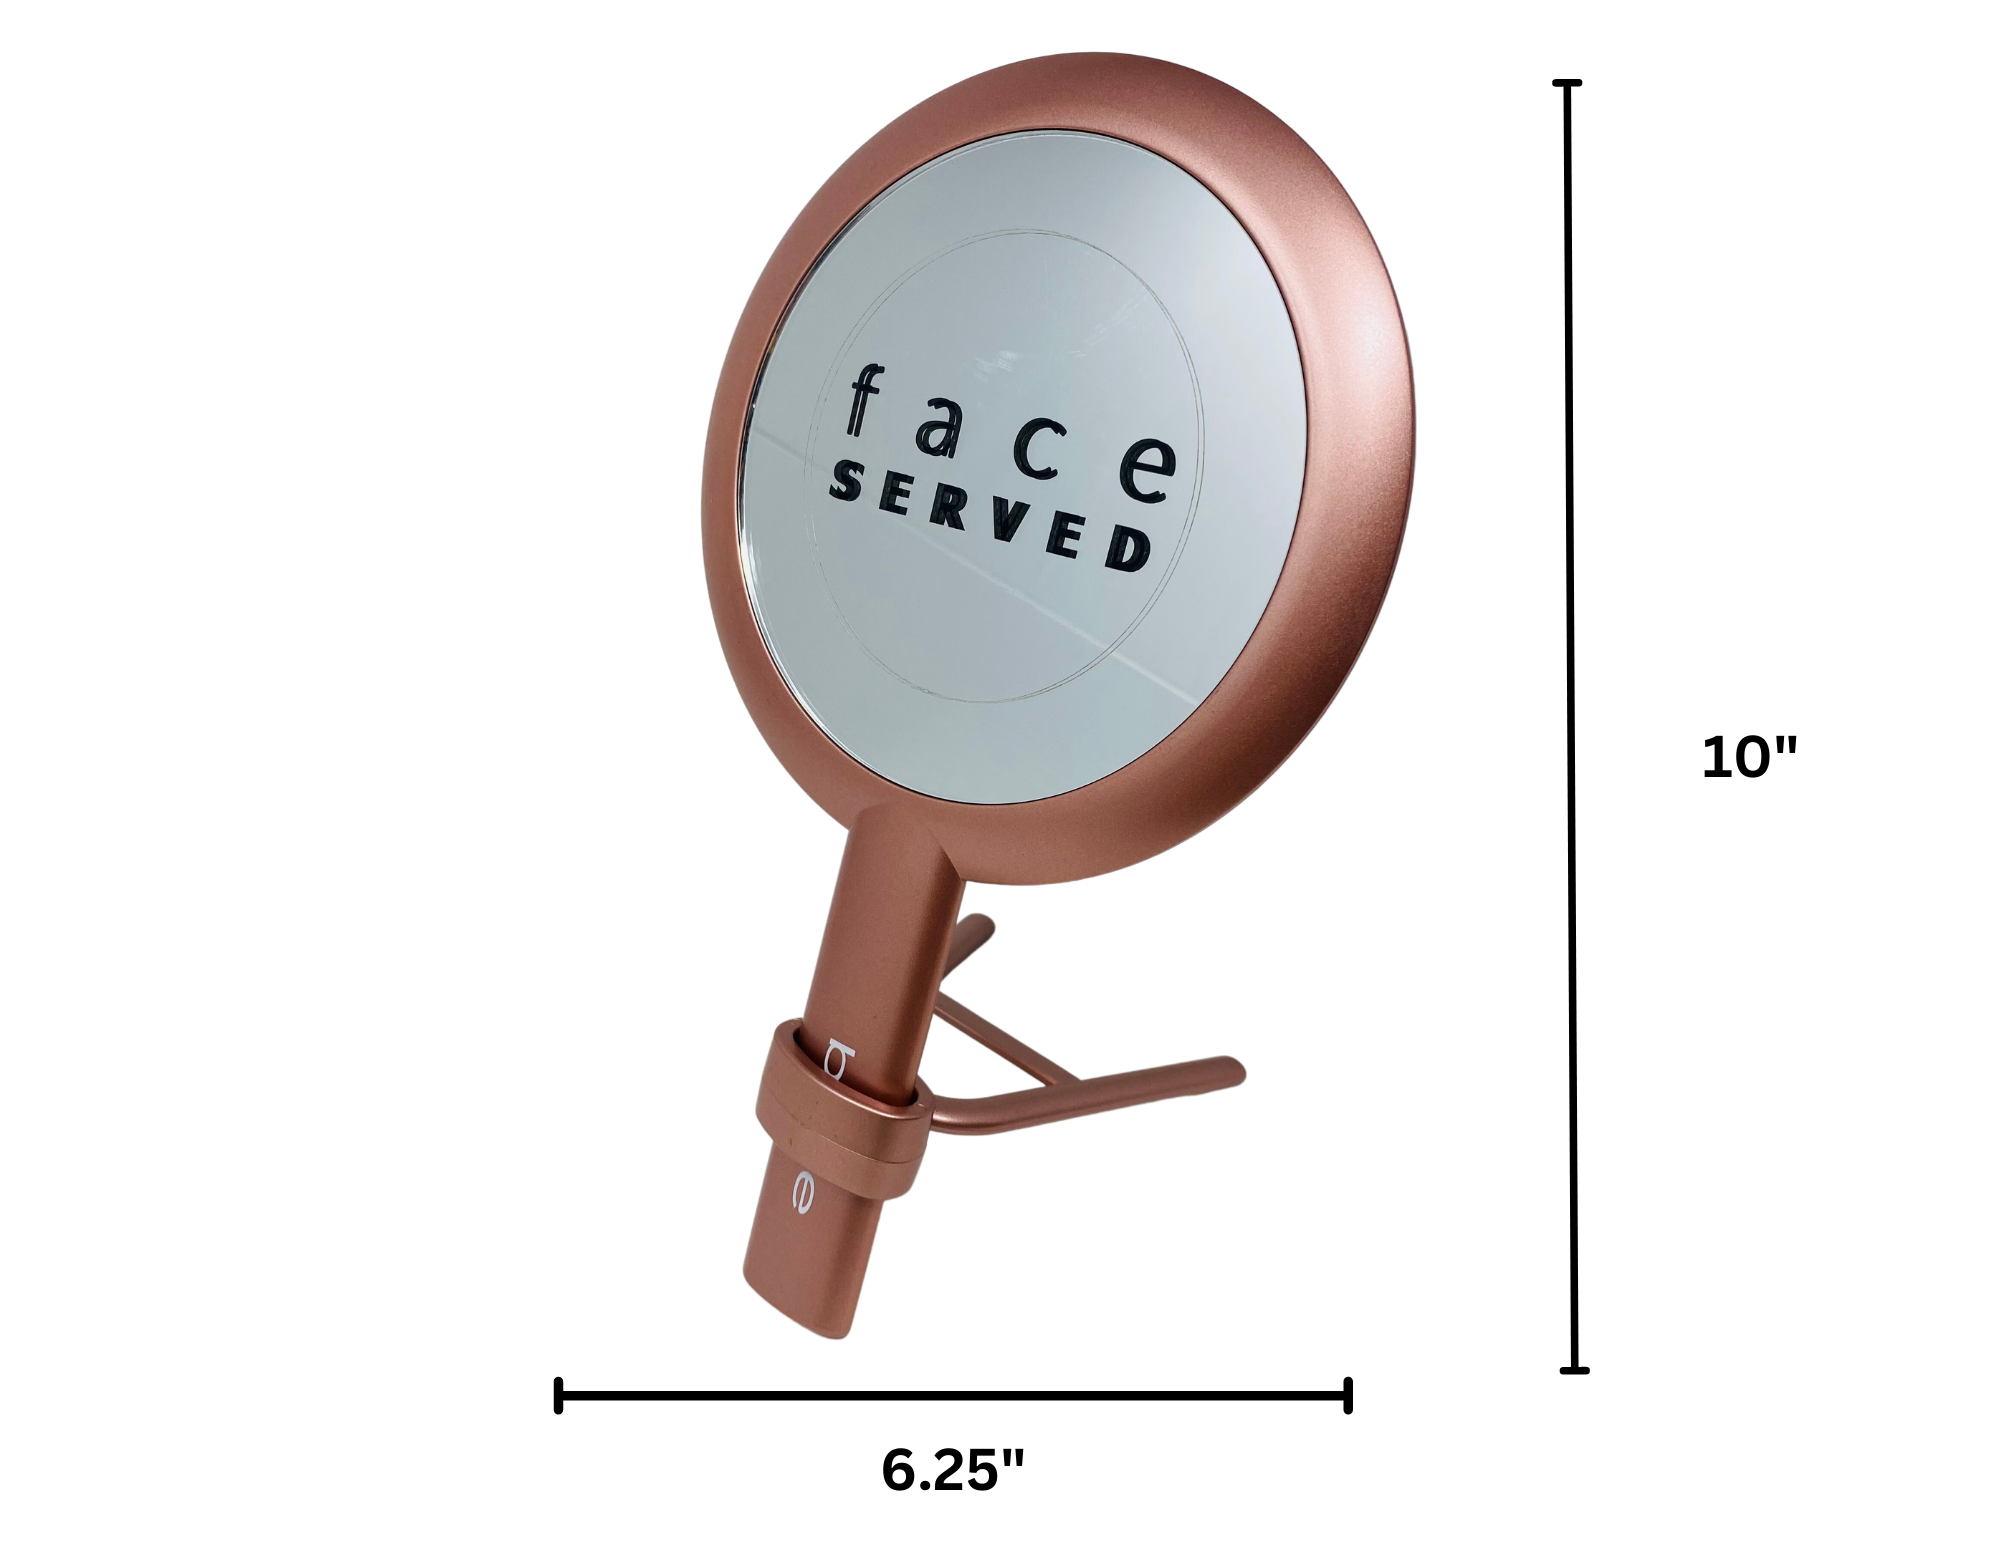 CLEARANCE 1X/10X BEBE Magnifying Double-Sided Rose Gold Tabletop/Handheld Mirror (10"H x 6.25"L)